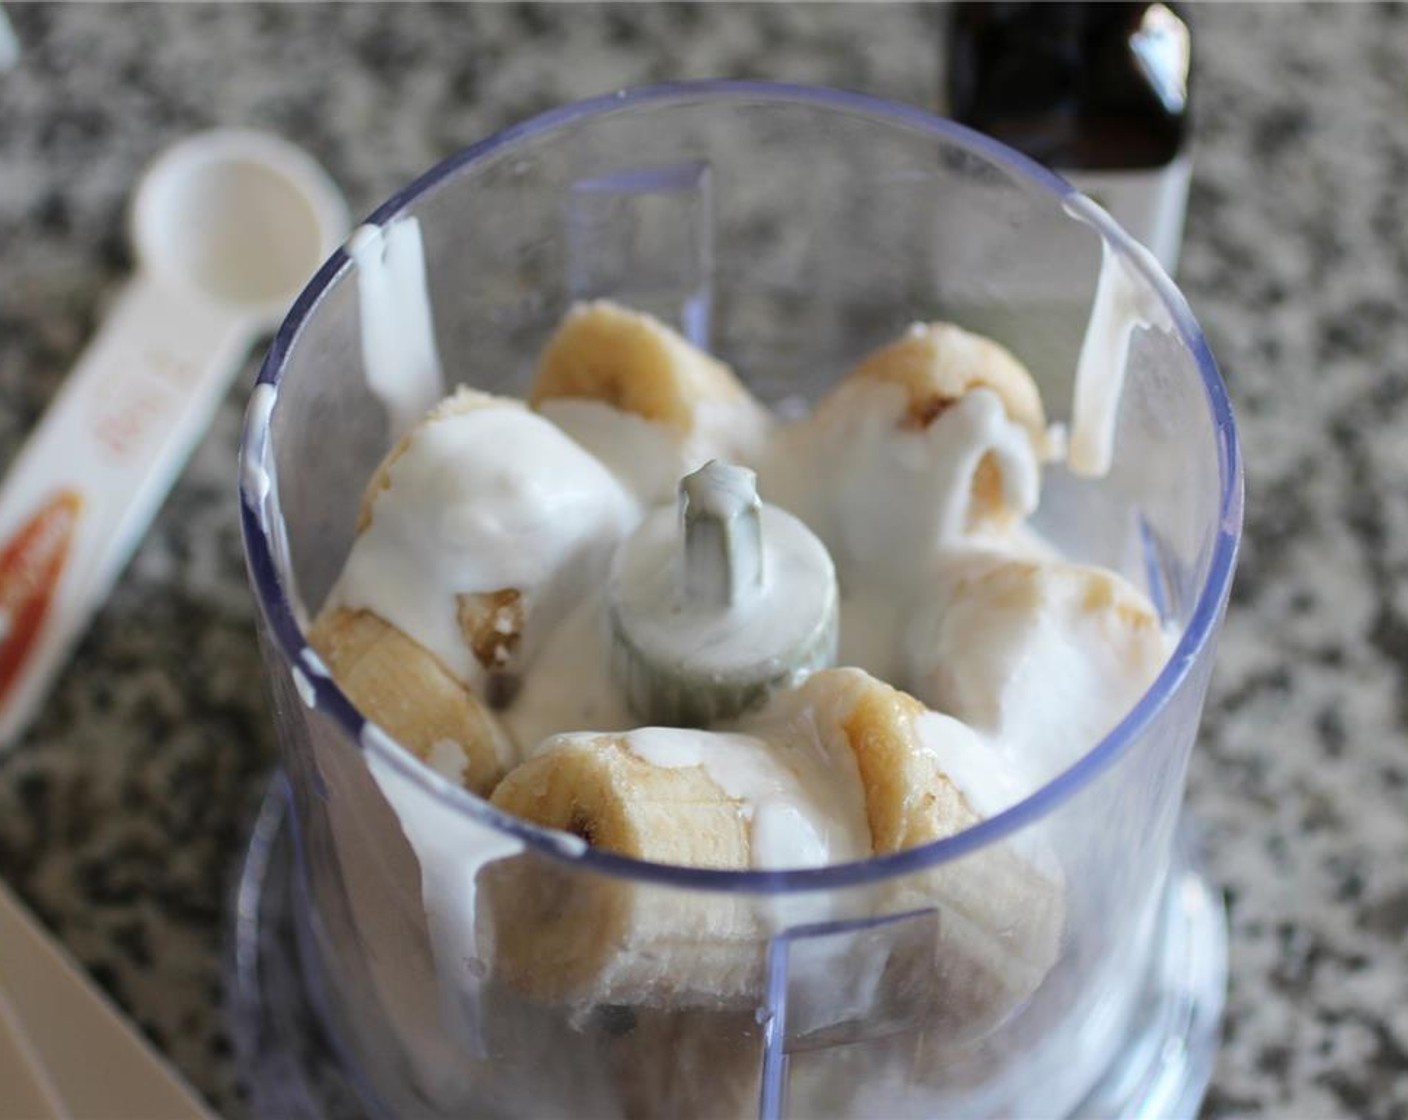 step 3 Add frozen bananas, coconut cream, and Peppermint Oil (1 tsp) to a food processor. Process until the mixture becomes like a soft-serve consistency and there doesn’t appear to be any large chunks of bananas.